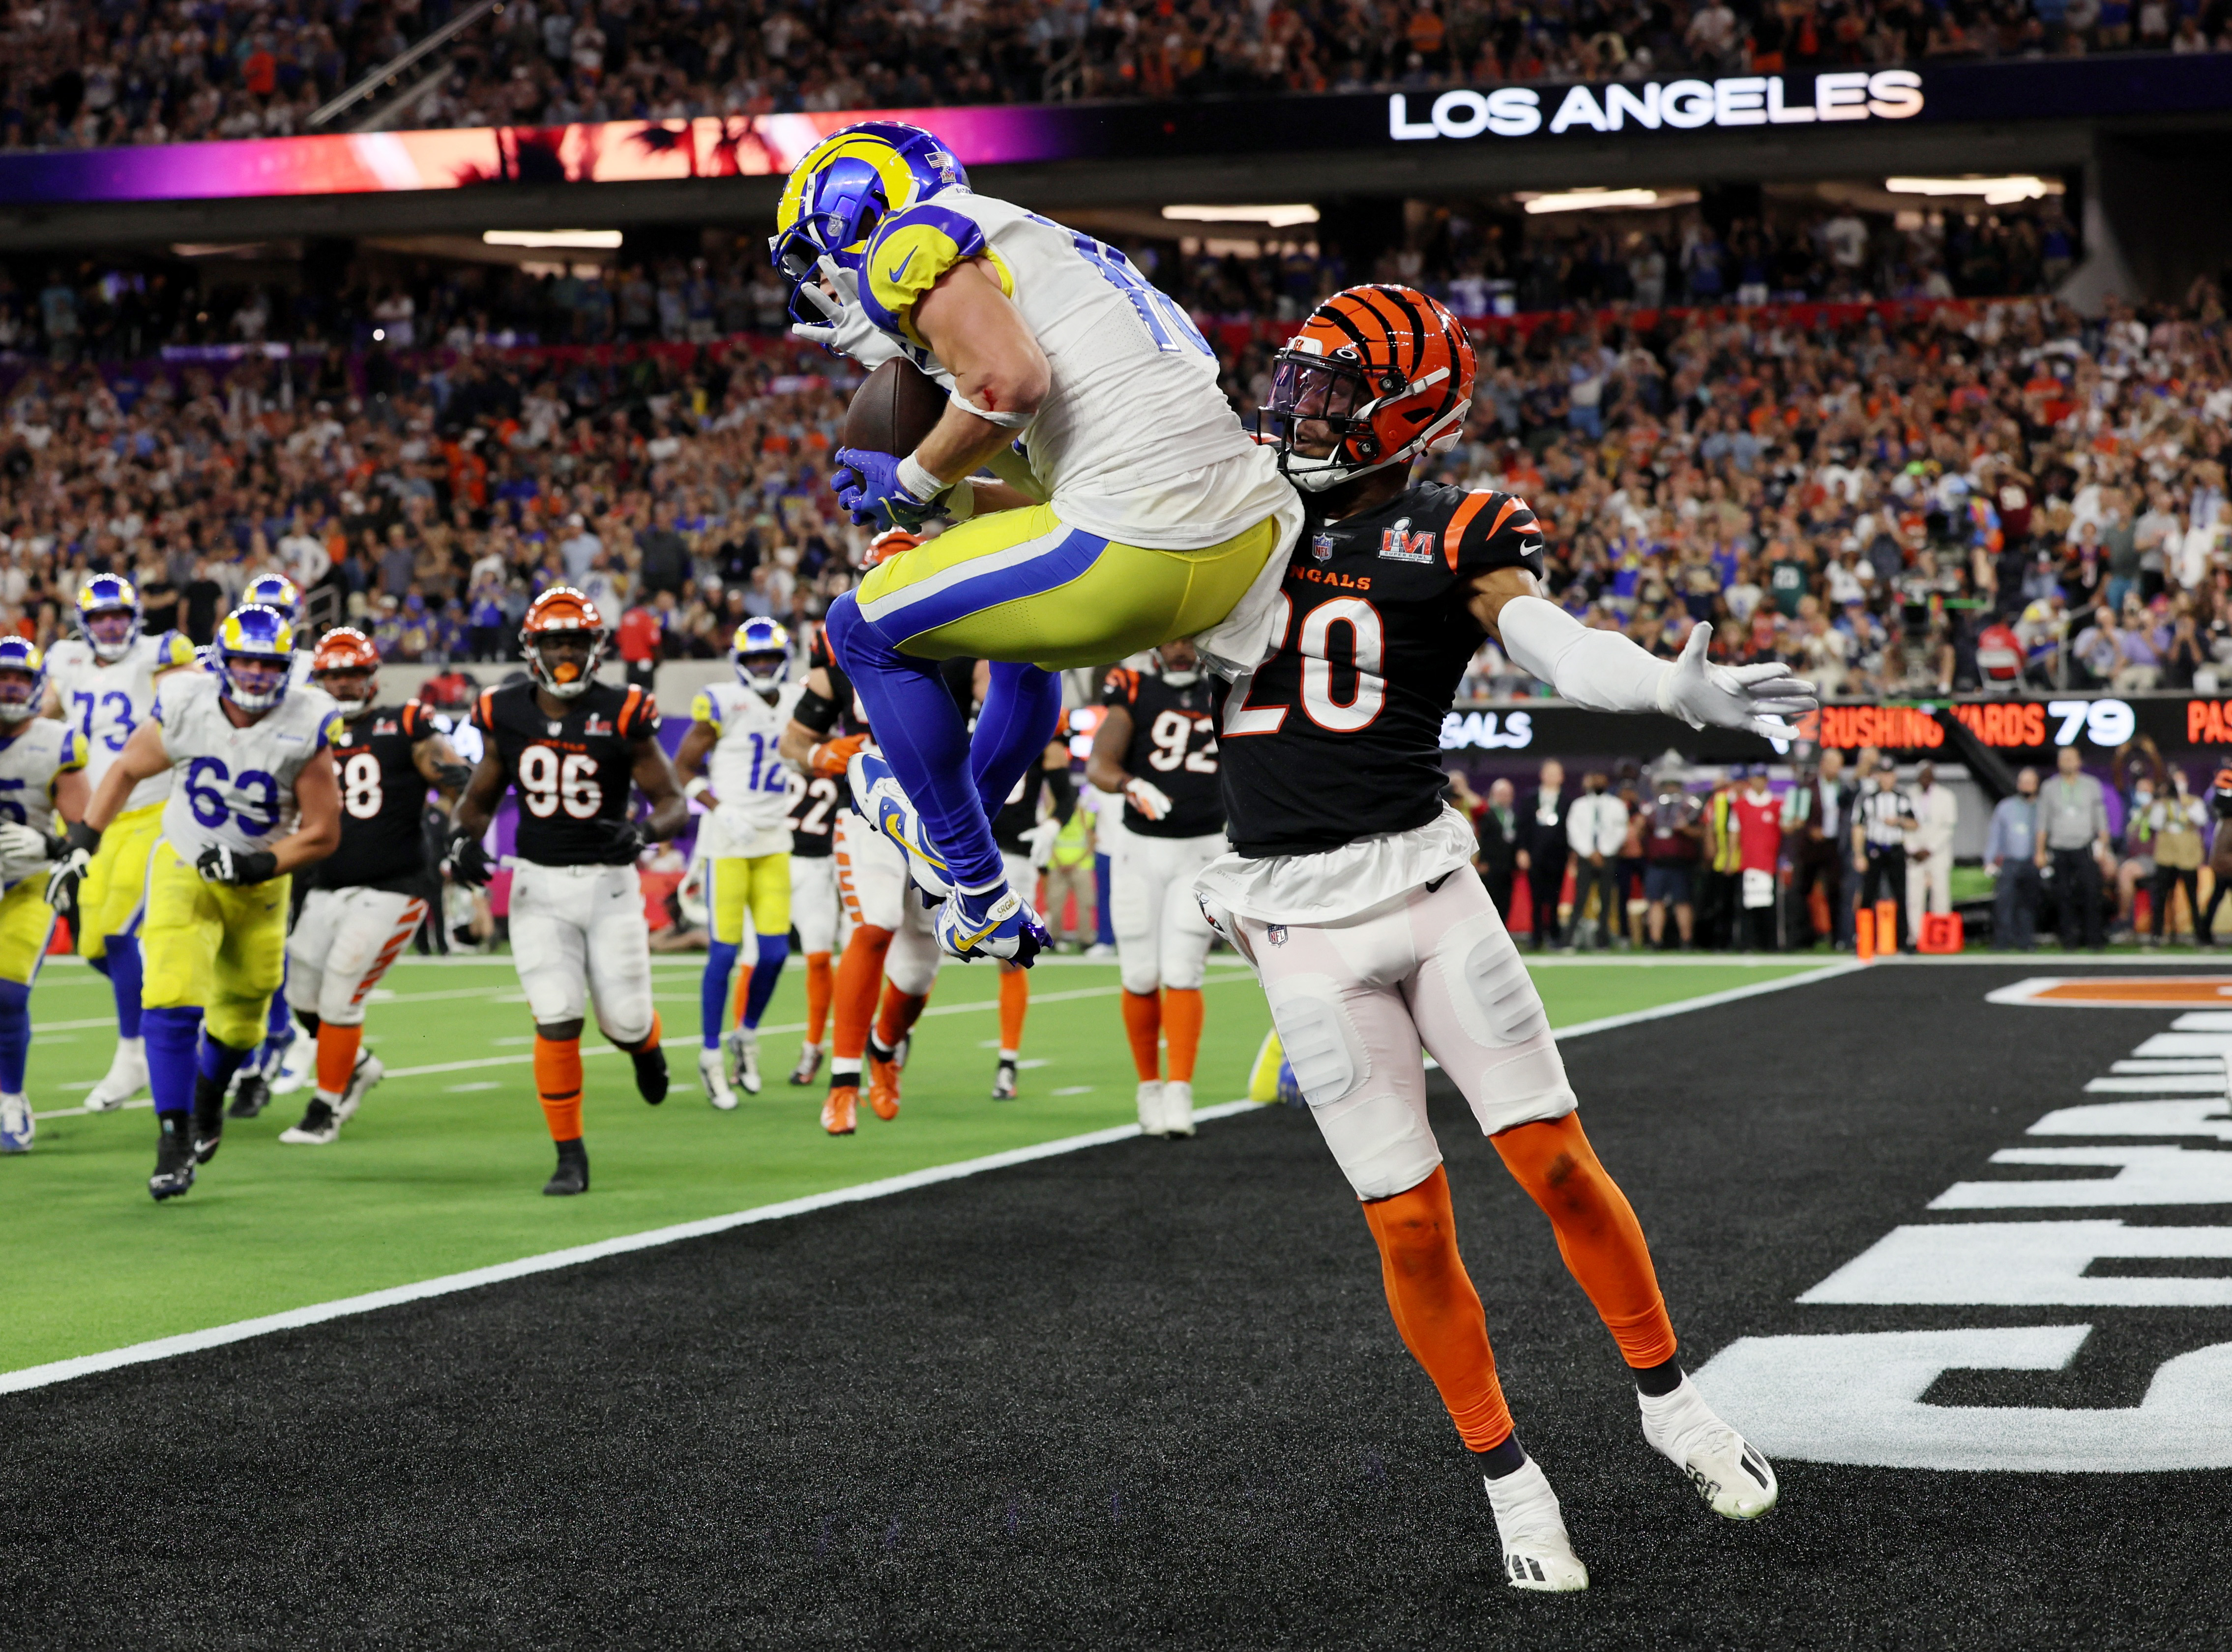 LA Rams overcome injuries, dig deep in rally to beat Bengals in